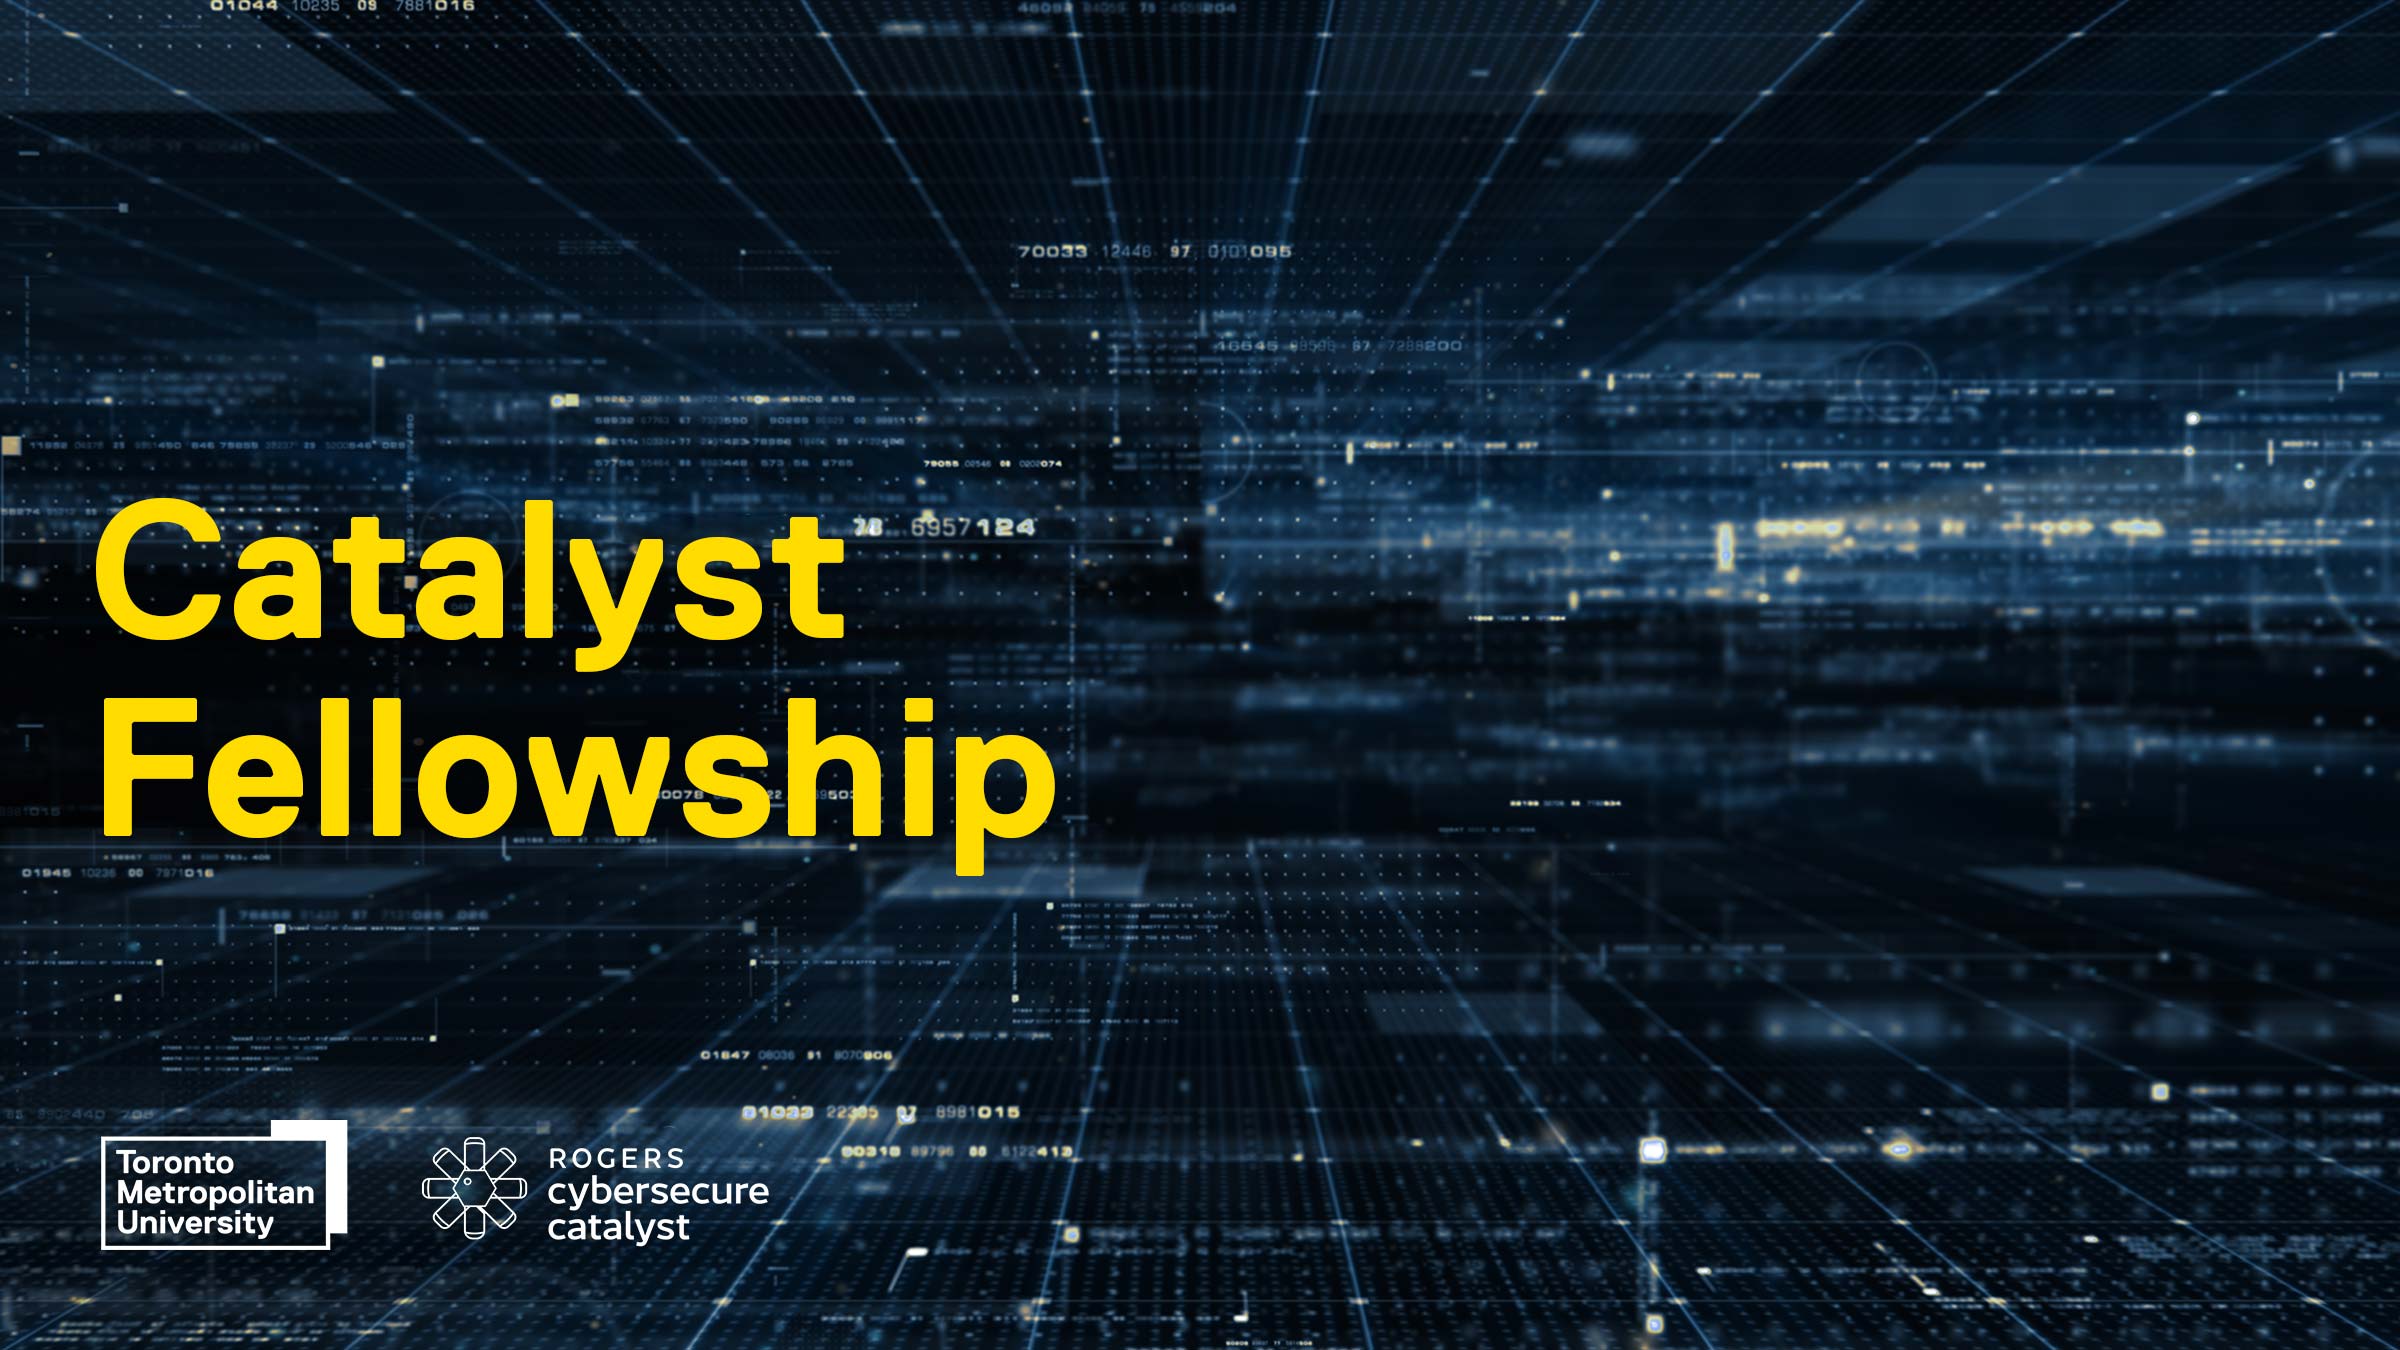 The title “Catalyst Fellowship” over a three-dimensional grid vanishing into the distance. Logos for Toronto Metropolitan University and Rogers Cybersecure Catalyst appear at the bottom. 